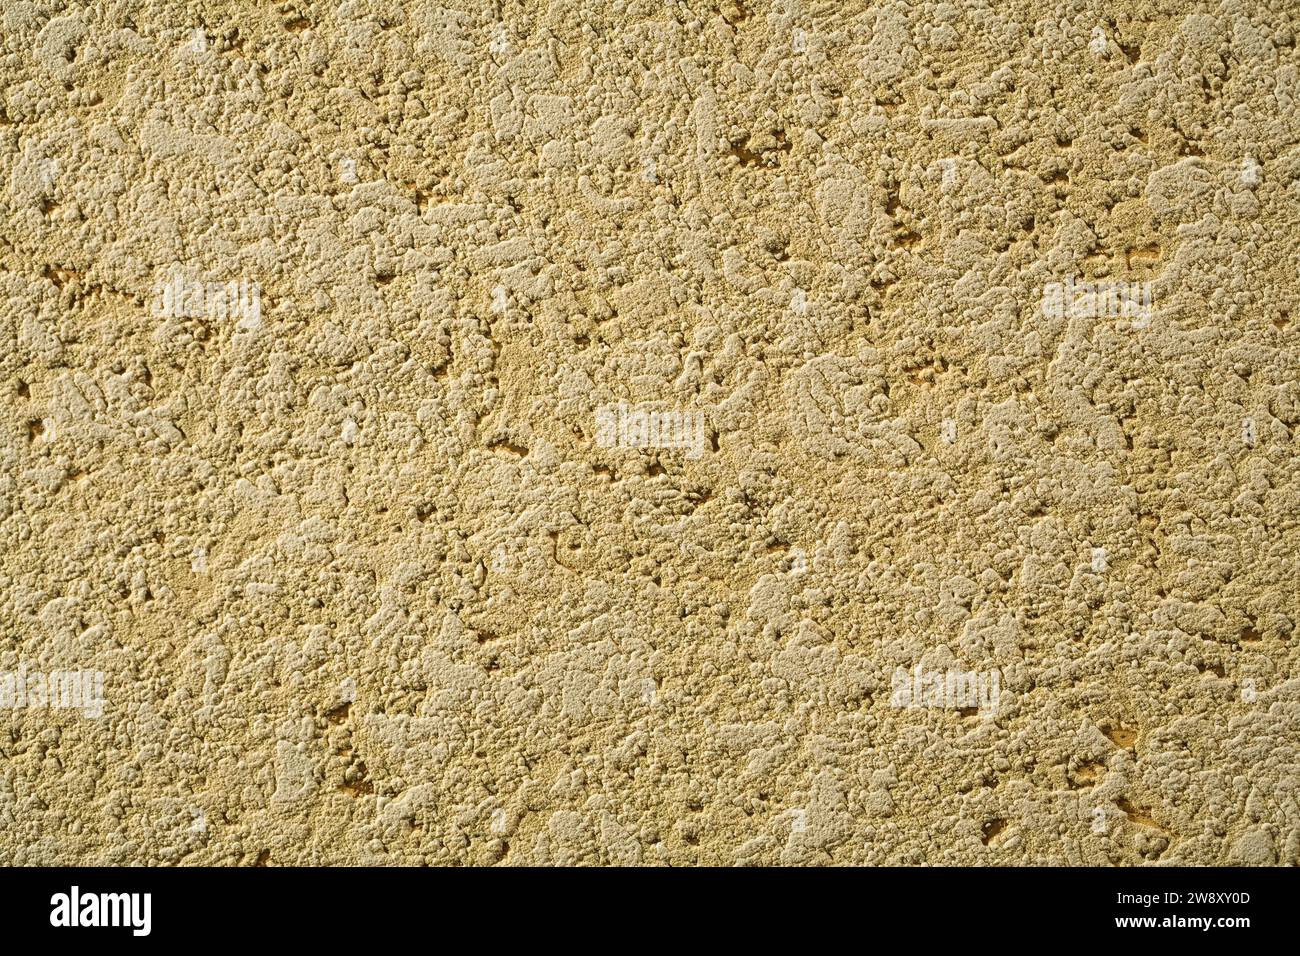 Texture of the abstract beige material Stock Photo